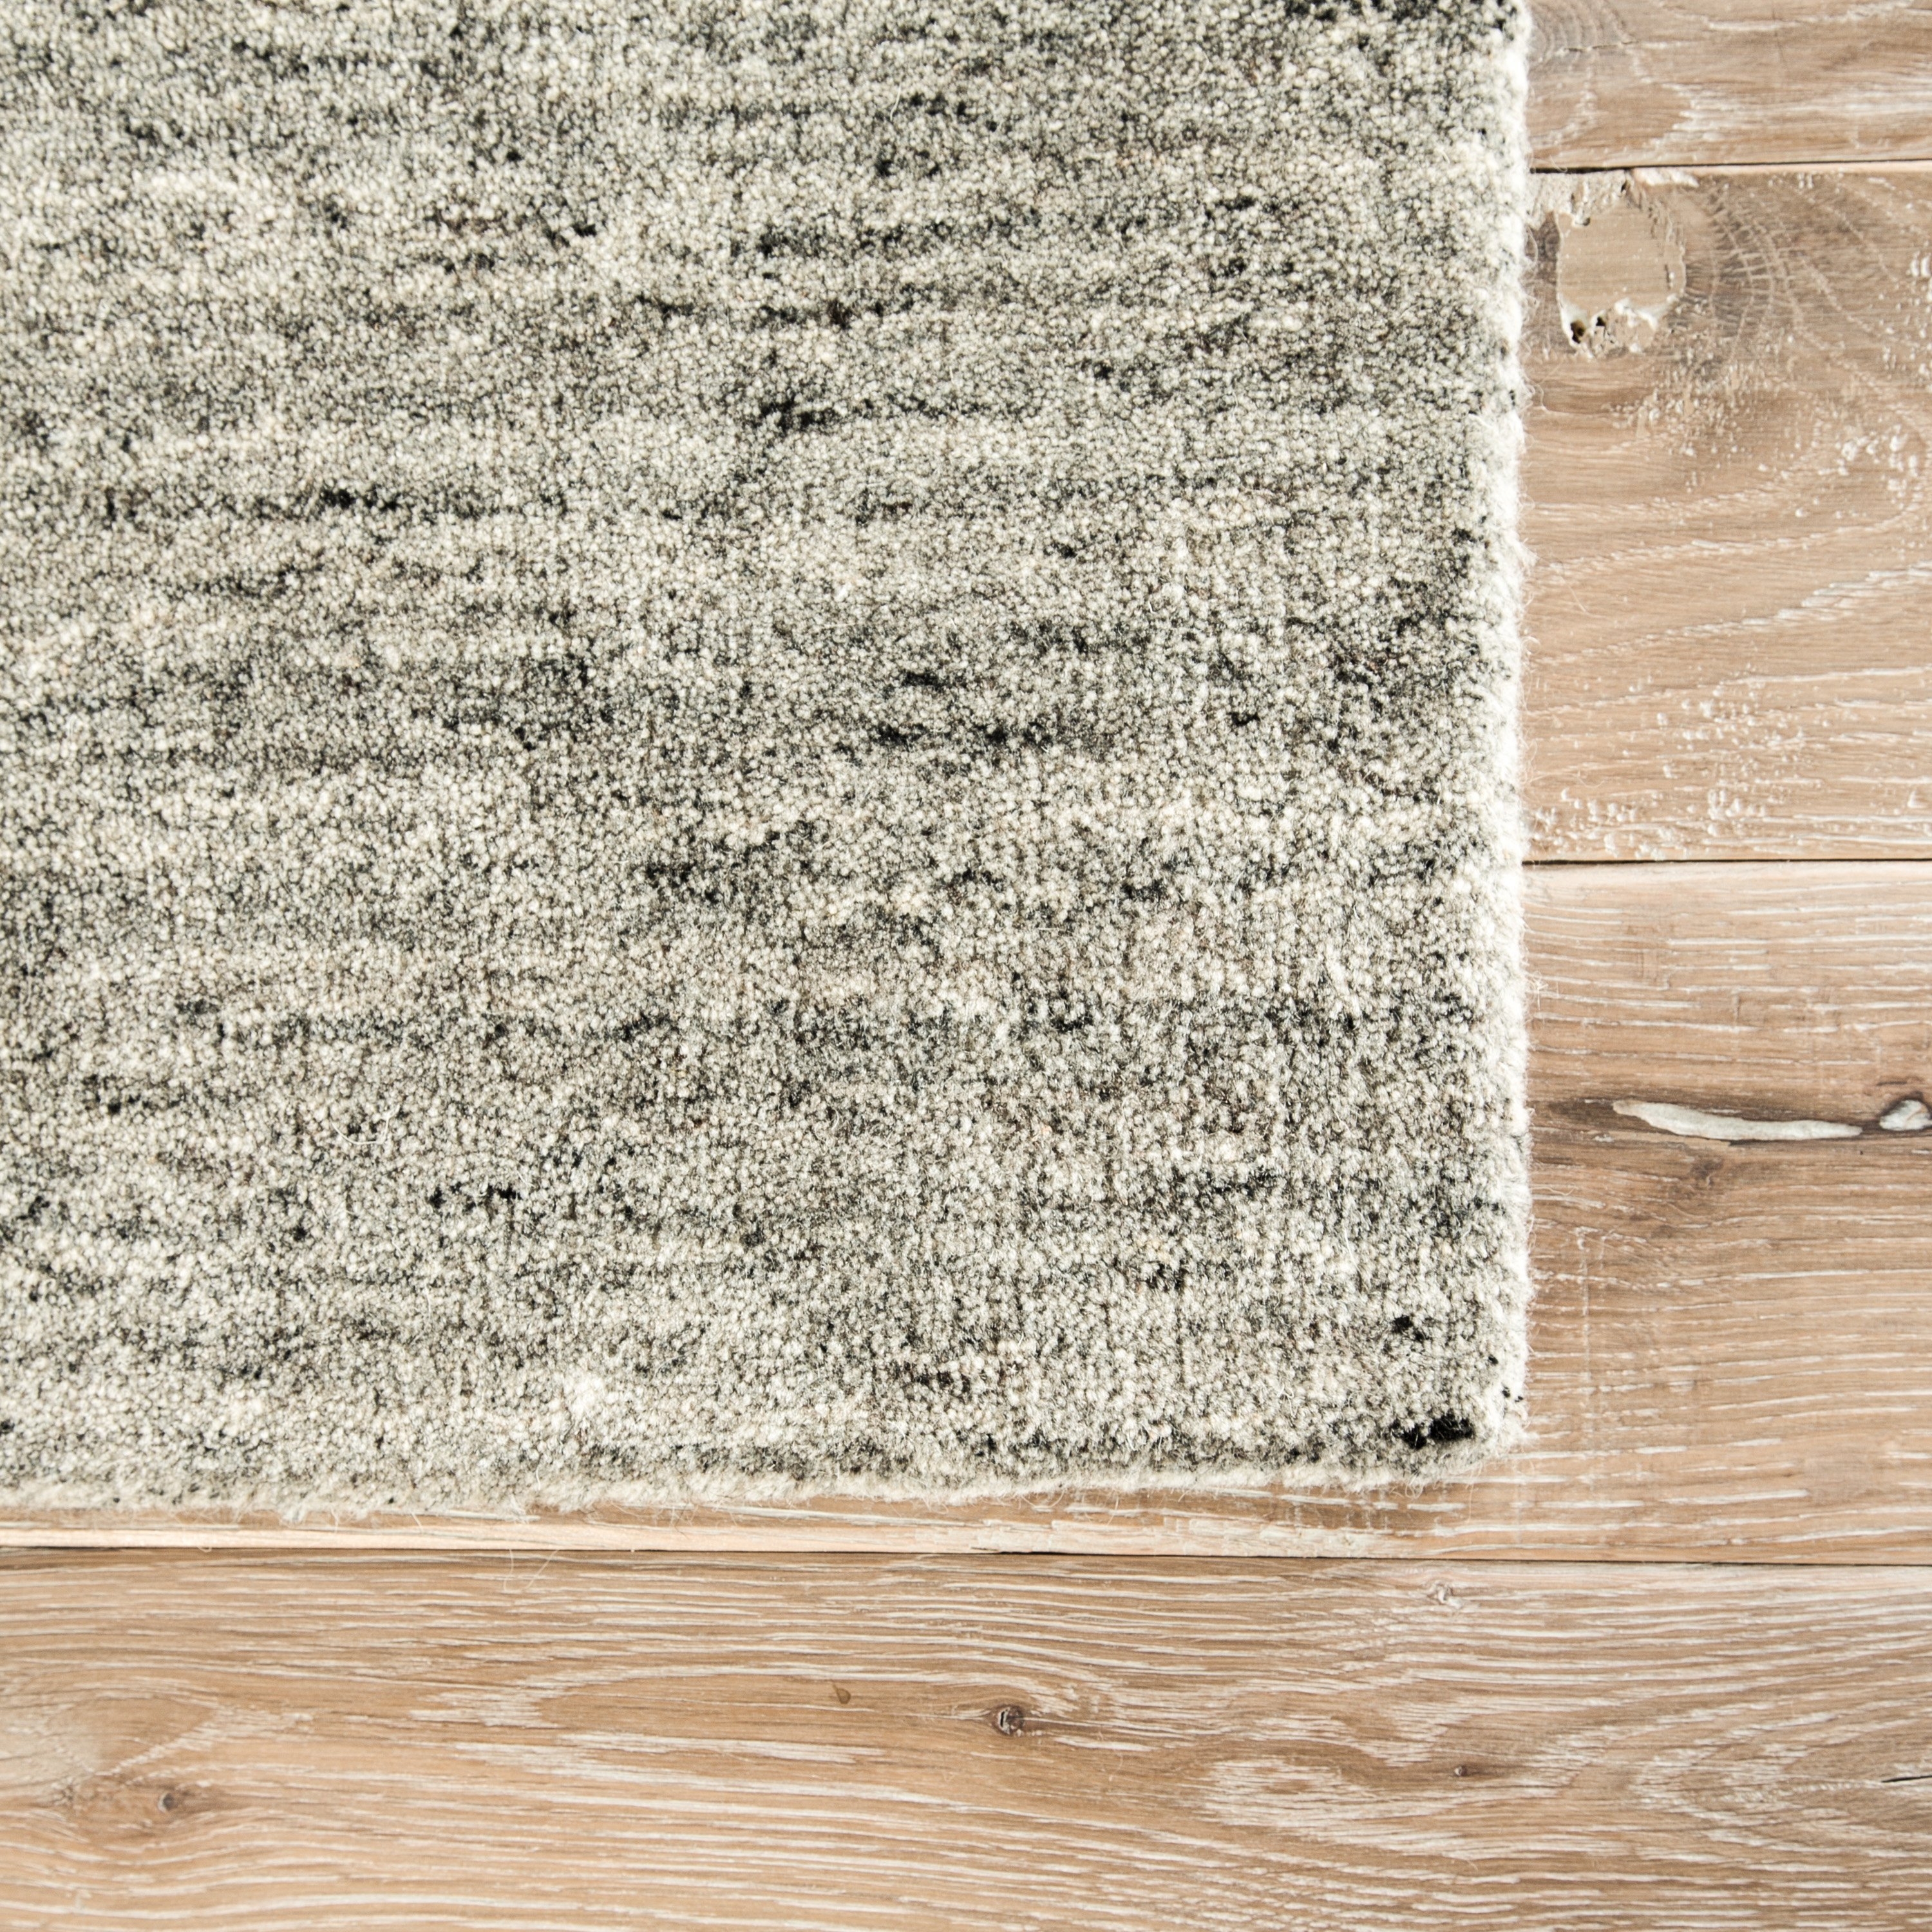 Elements Handmade Solid Gray/ Taupe Runner Rug (2'6" X 8') - Image 3